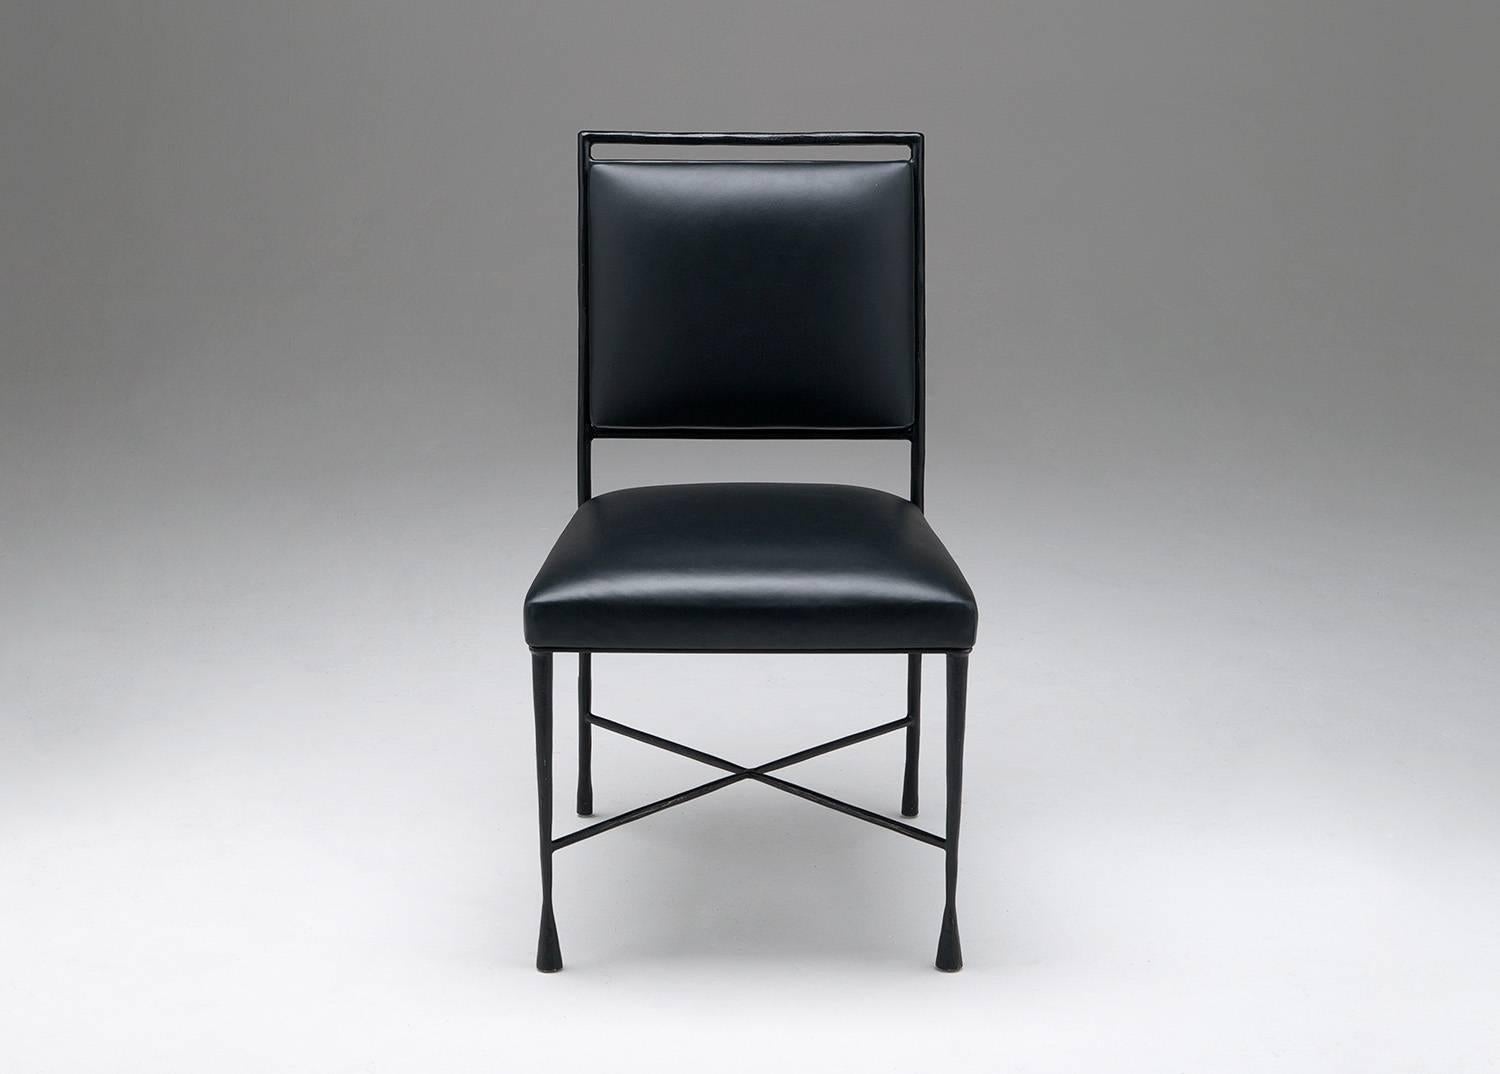 For EU buyers this piece is subject to a 20% VAT tax, which will be added to the price after the order has confirmed.  Please contact the Gallery for further information. 

Grillo Demo
Pair of Chairs 'Arki,' 
2000.
Fer forgé, black leather